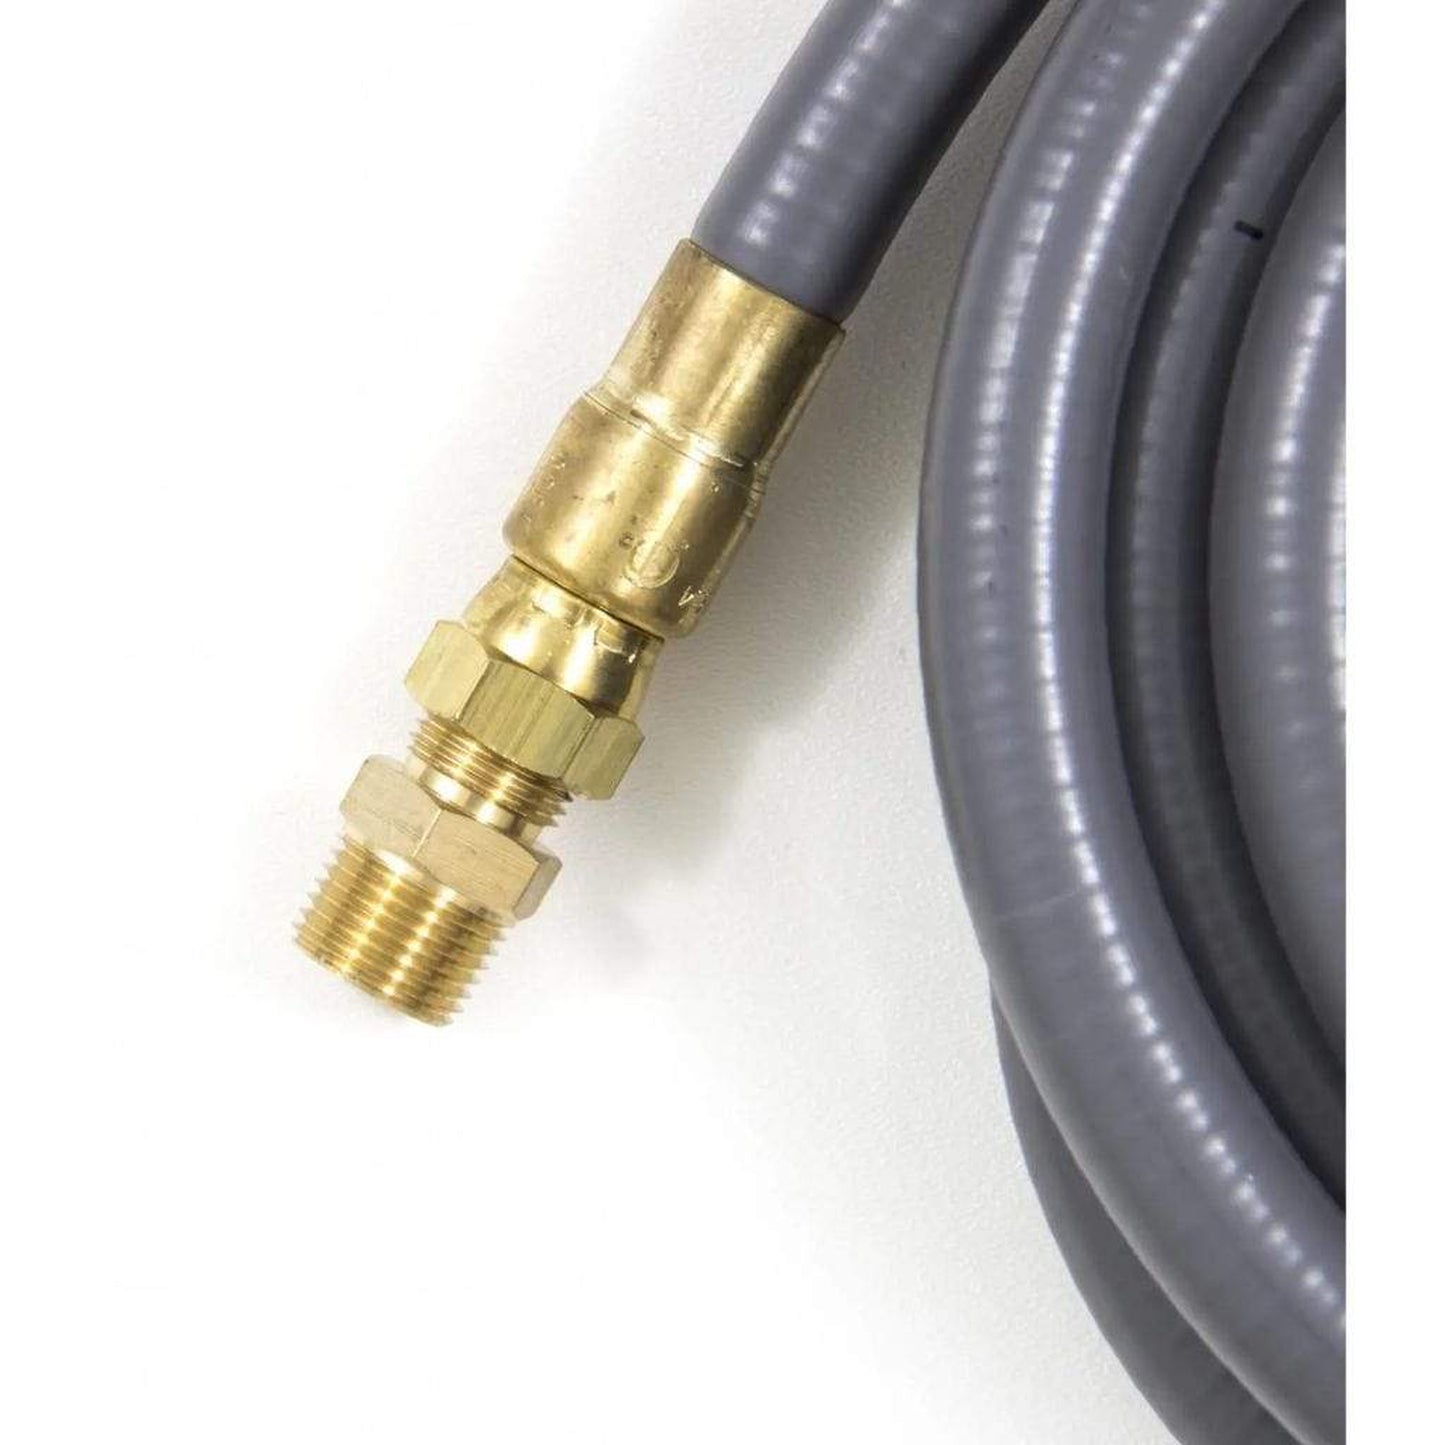 Blaze 0.5" Natural Gas Hose with Quick Disconnect